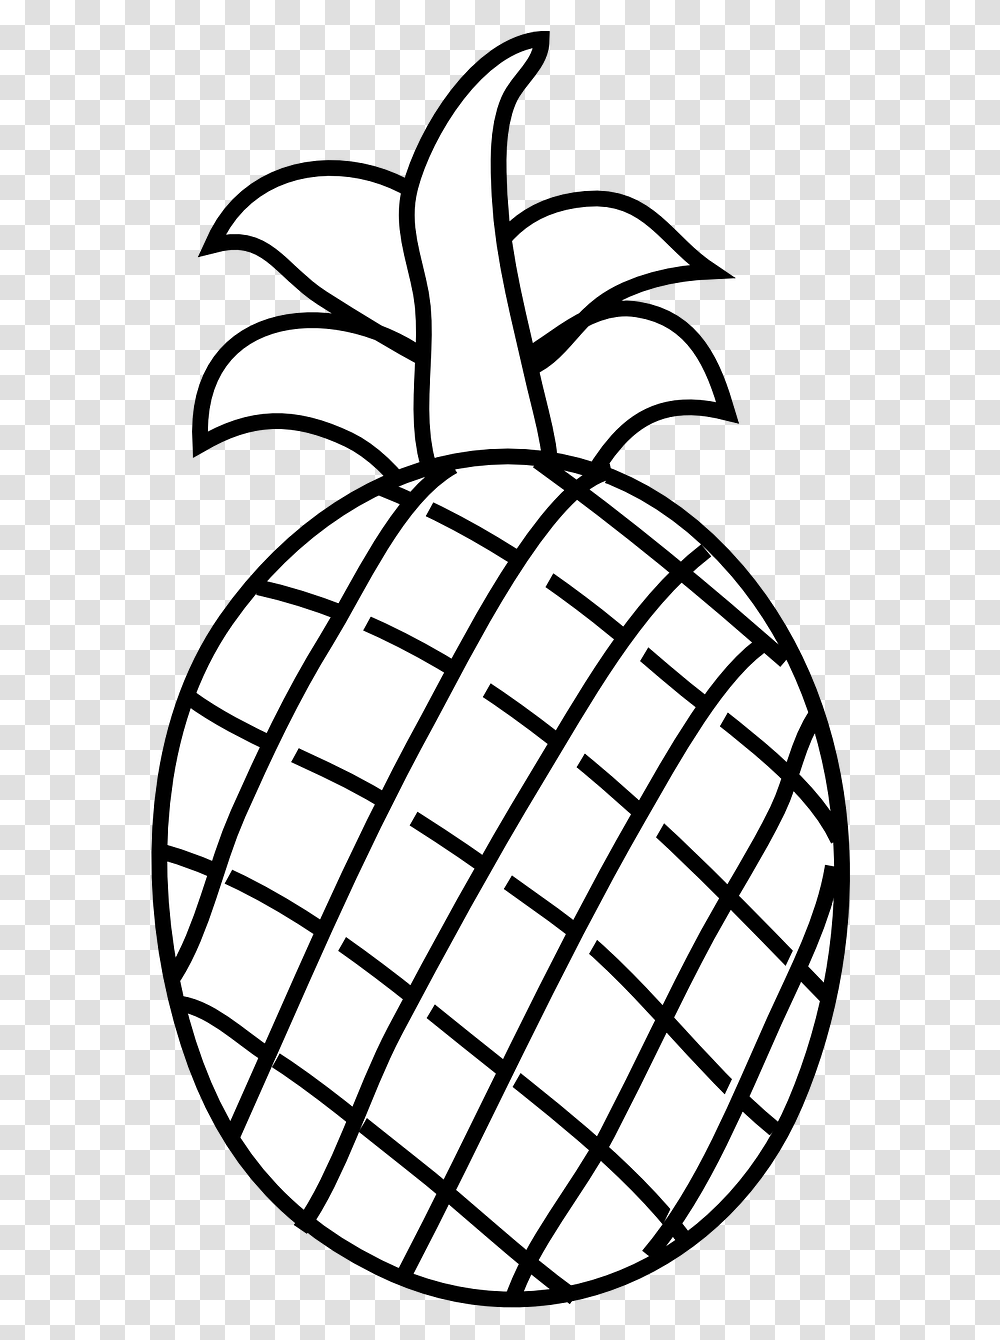 Pineapple Drawing Pineapple Fruit Food Plant Image Pineapple Clip Art, Bomb, Weapon, Weaponry, Diamond Transparent Png